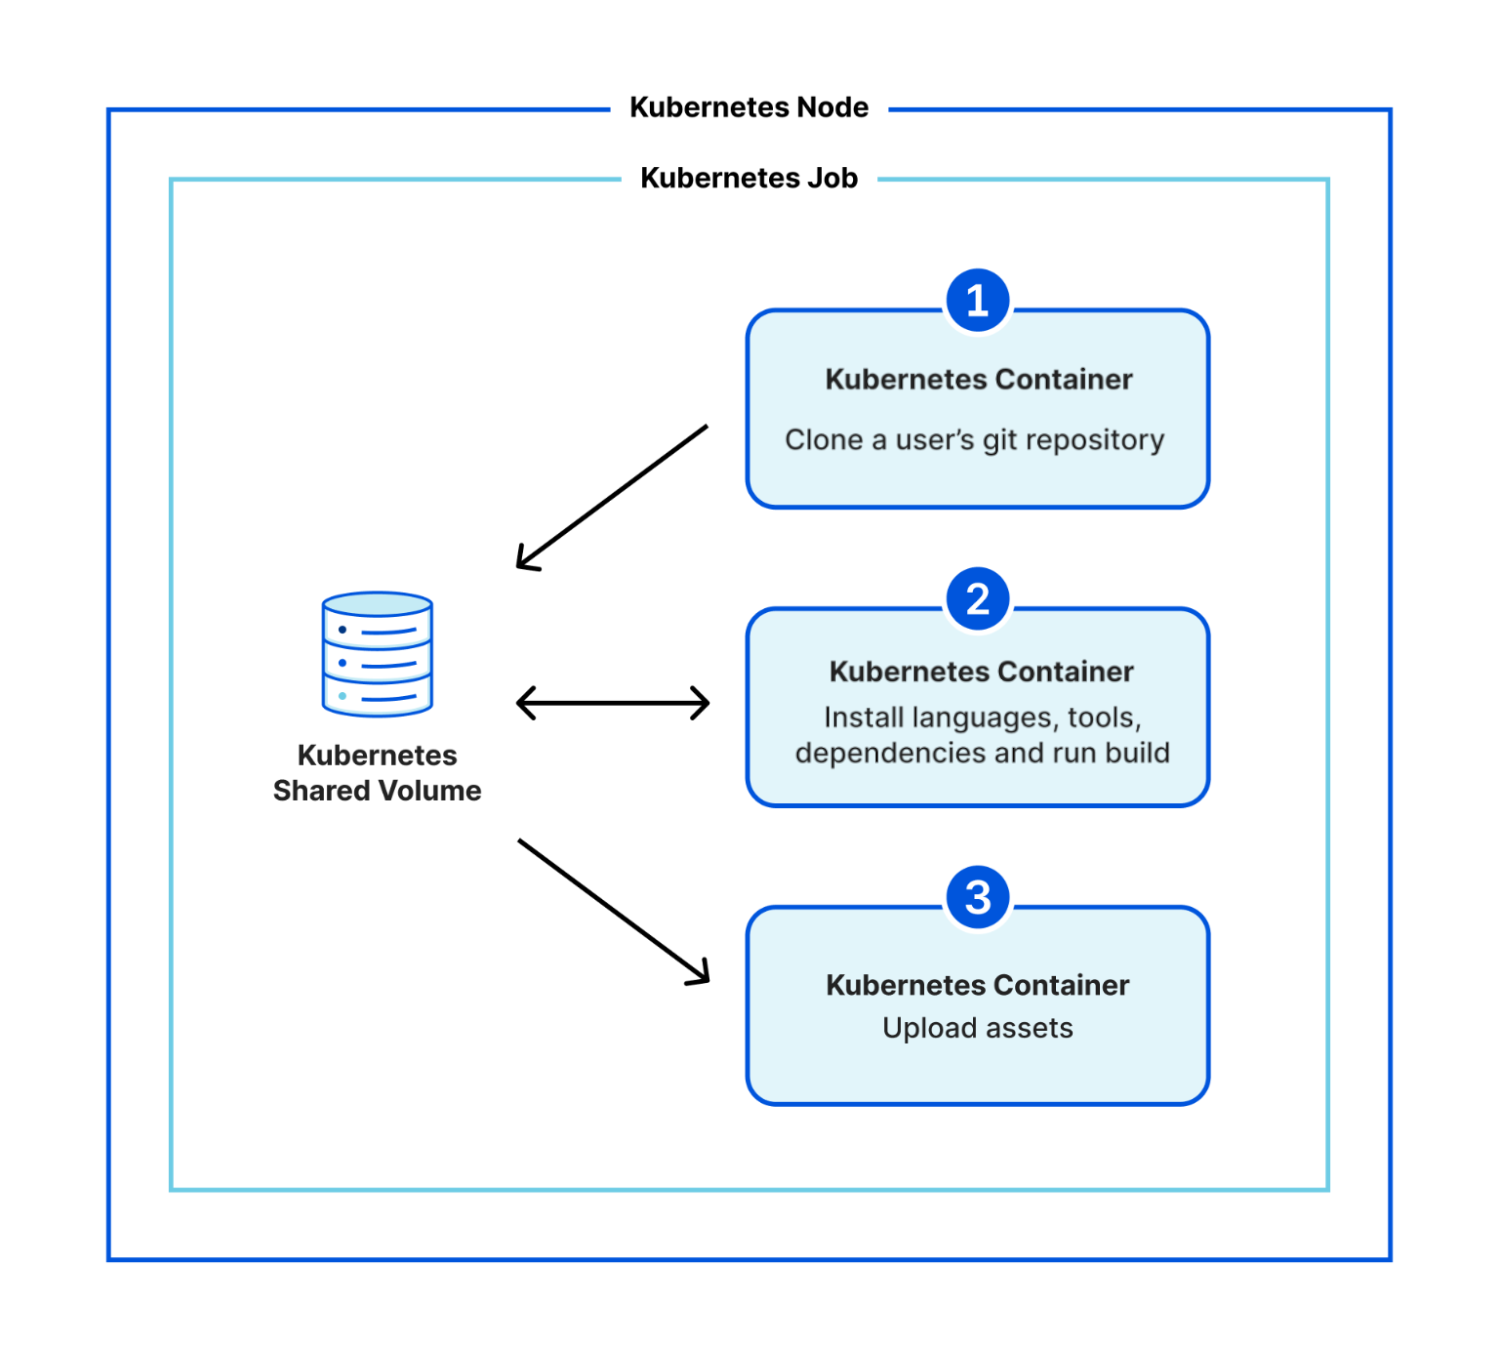 A diagram of three sequential Kubernetes containers which all connect to a Kubernetes Shared Volume. They belong to a Kubernetes job which itself is run within a Kubernetes Node. The first container clones a user's git repository; the second installs languages, tools, dependencies and runs the build; and the third uploads the assets.